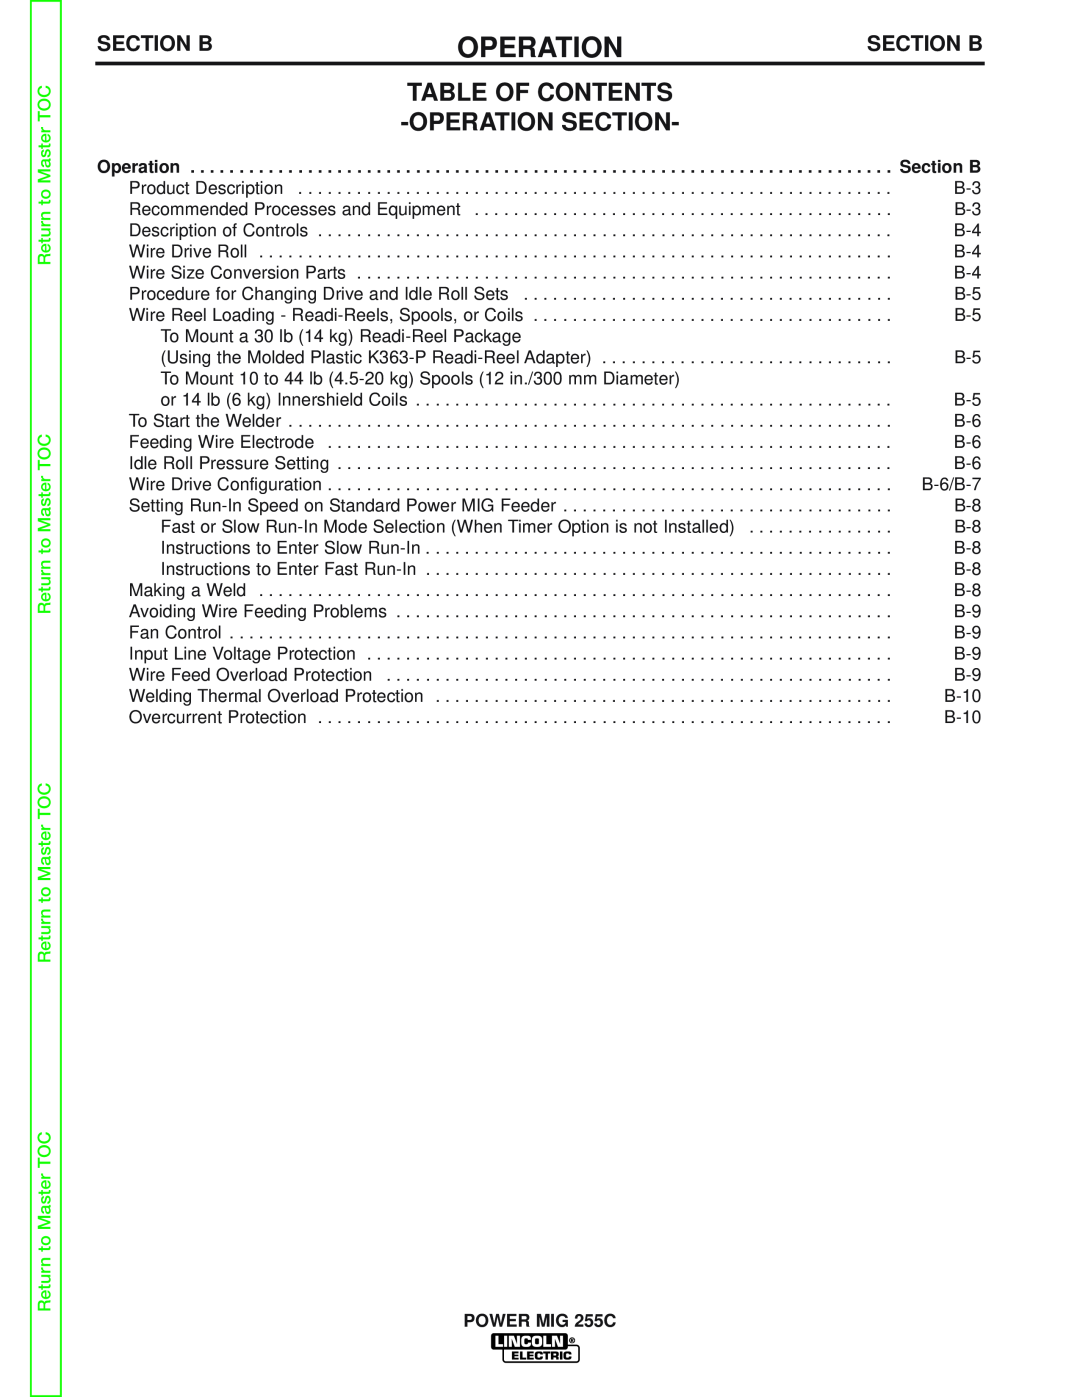 Lincoln Electric SVM170-A service manual Table Of Contents, Operation Section, Section B, Return to Master TOC 